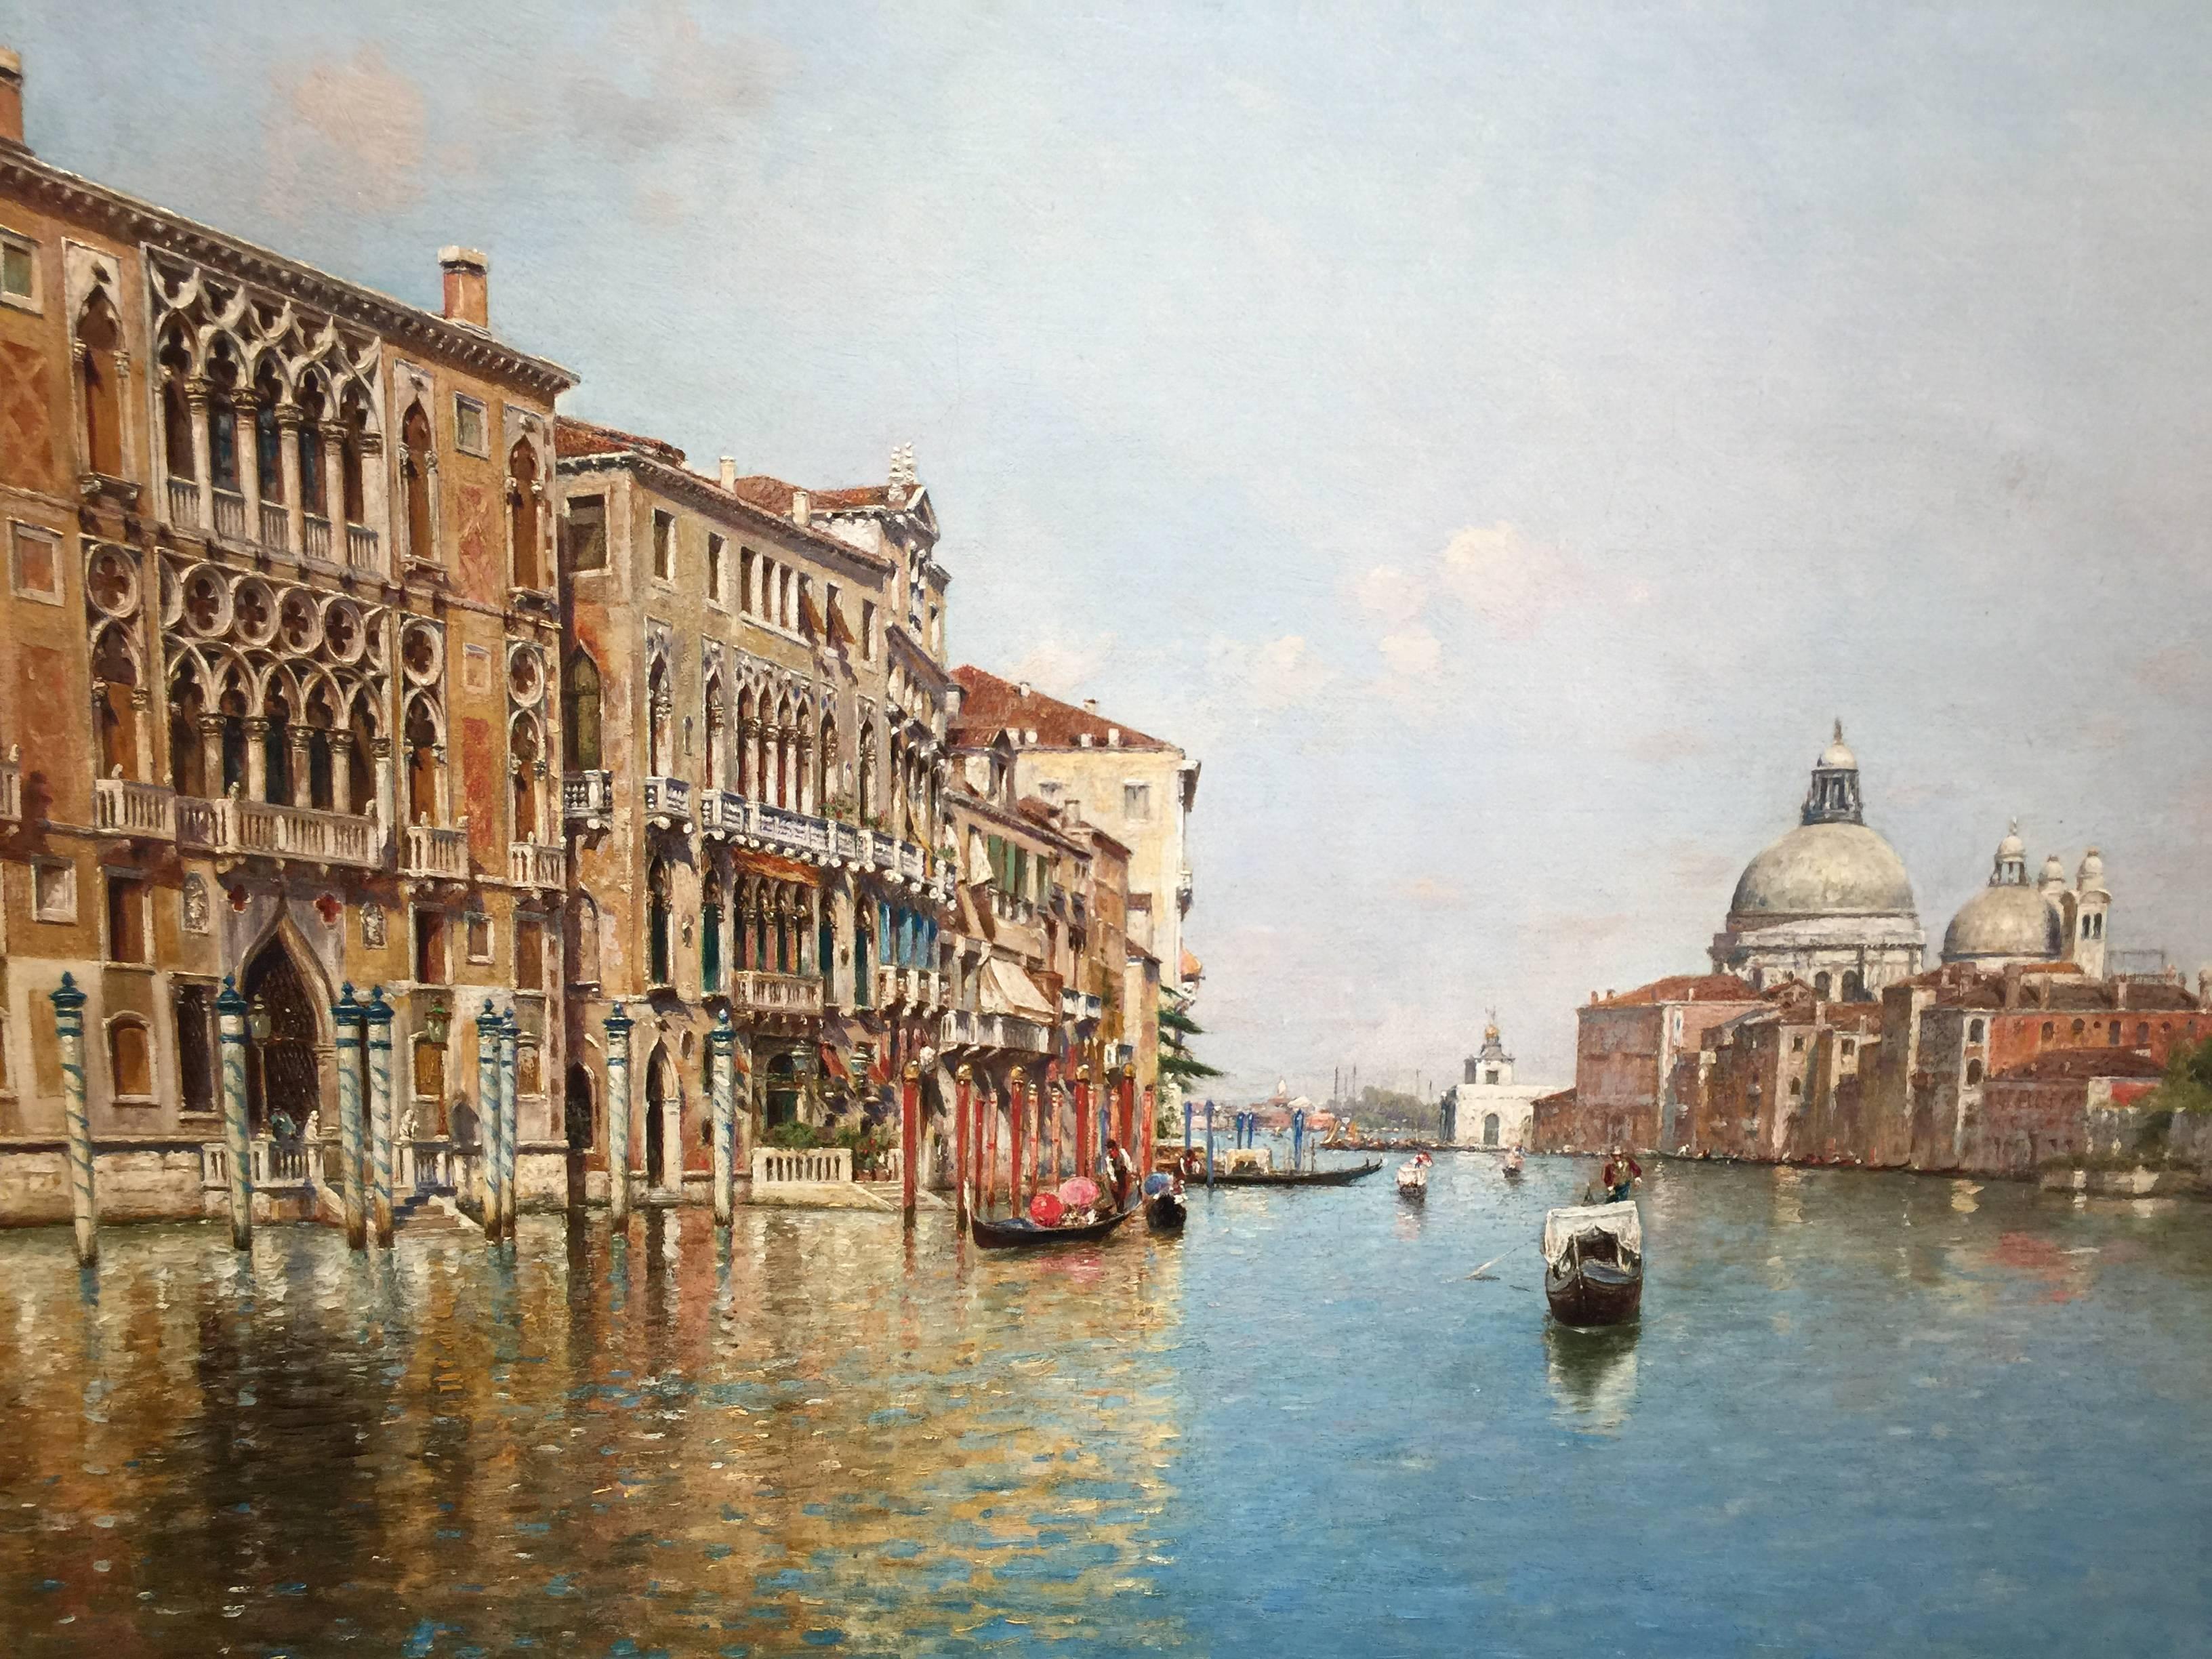 The Grand Canal, Venice, Italy - Painting by Raphael Senet Y Perez